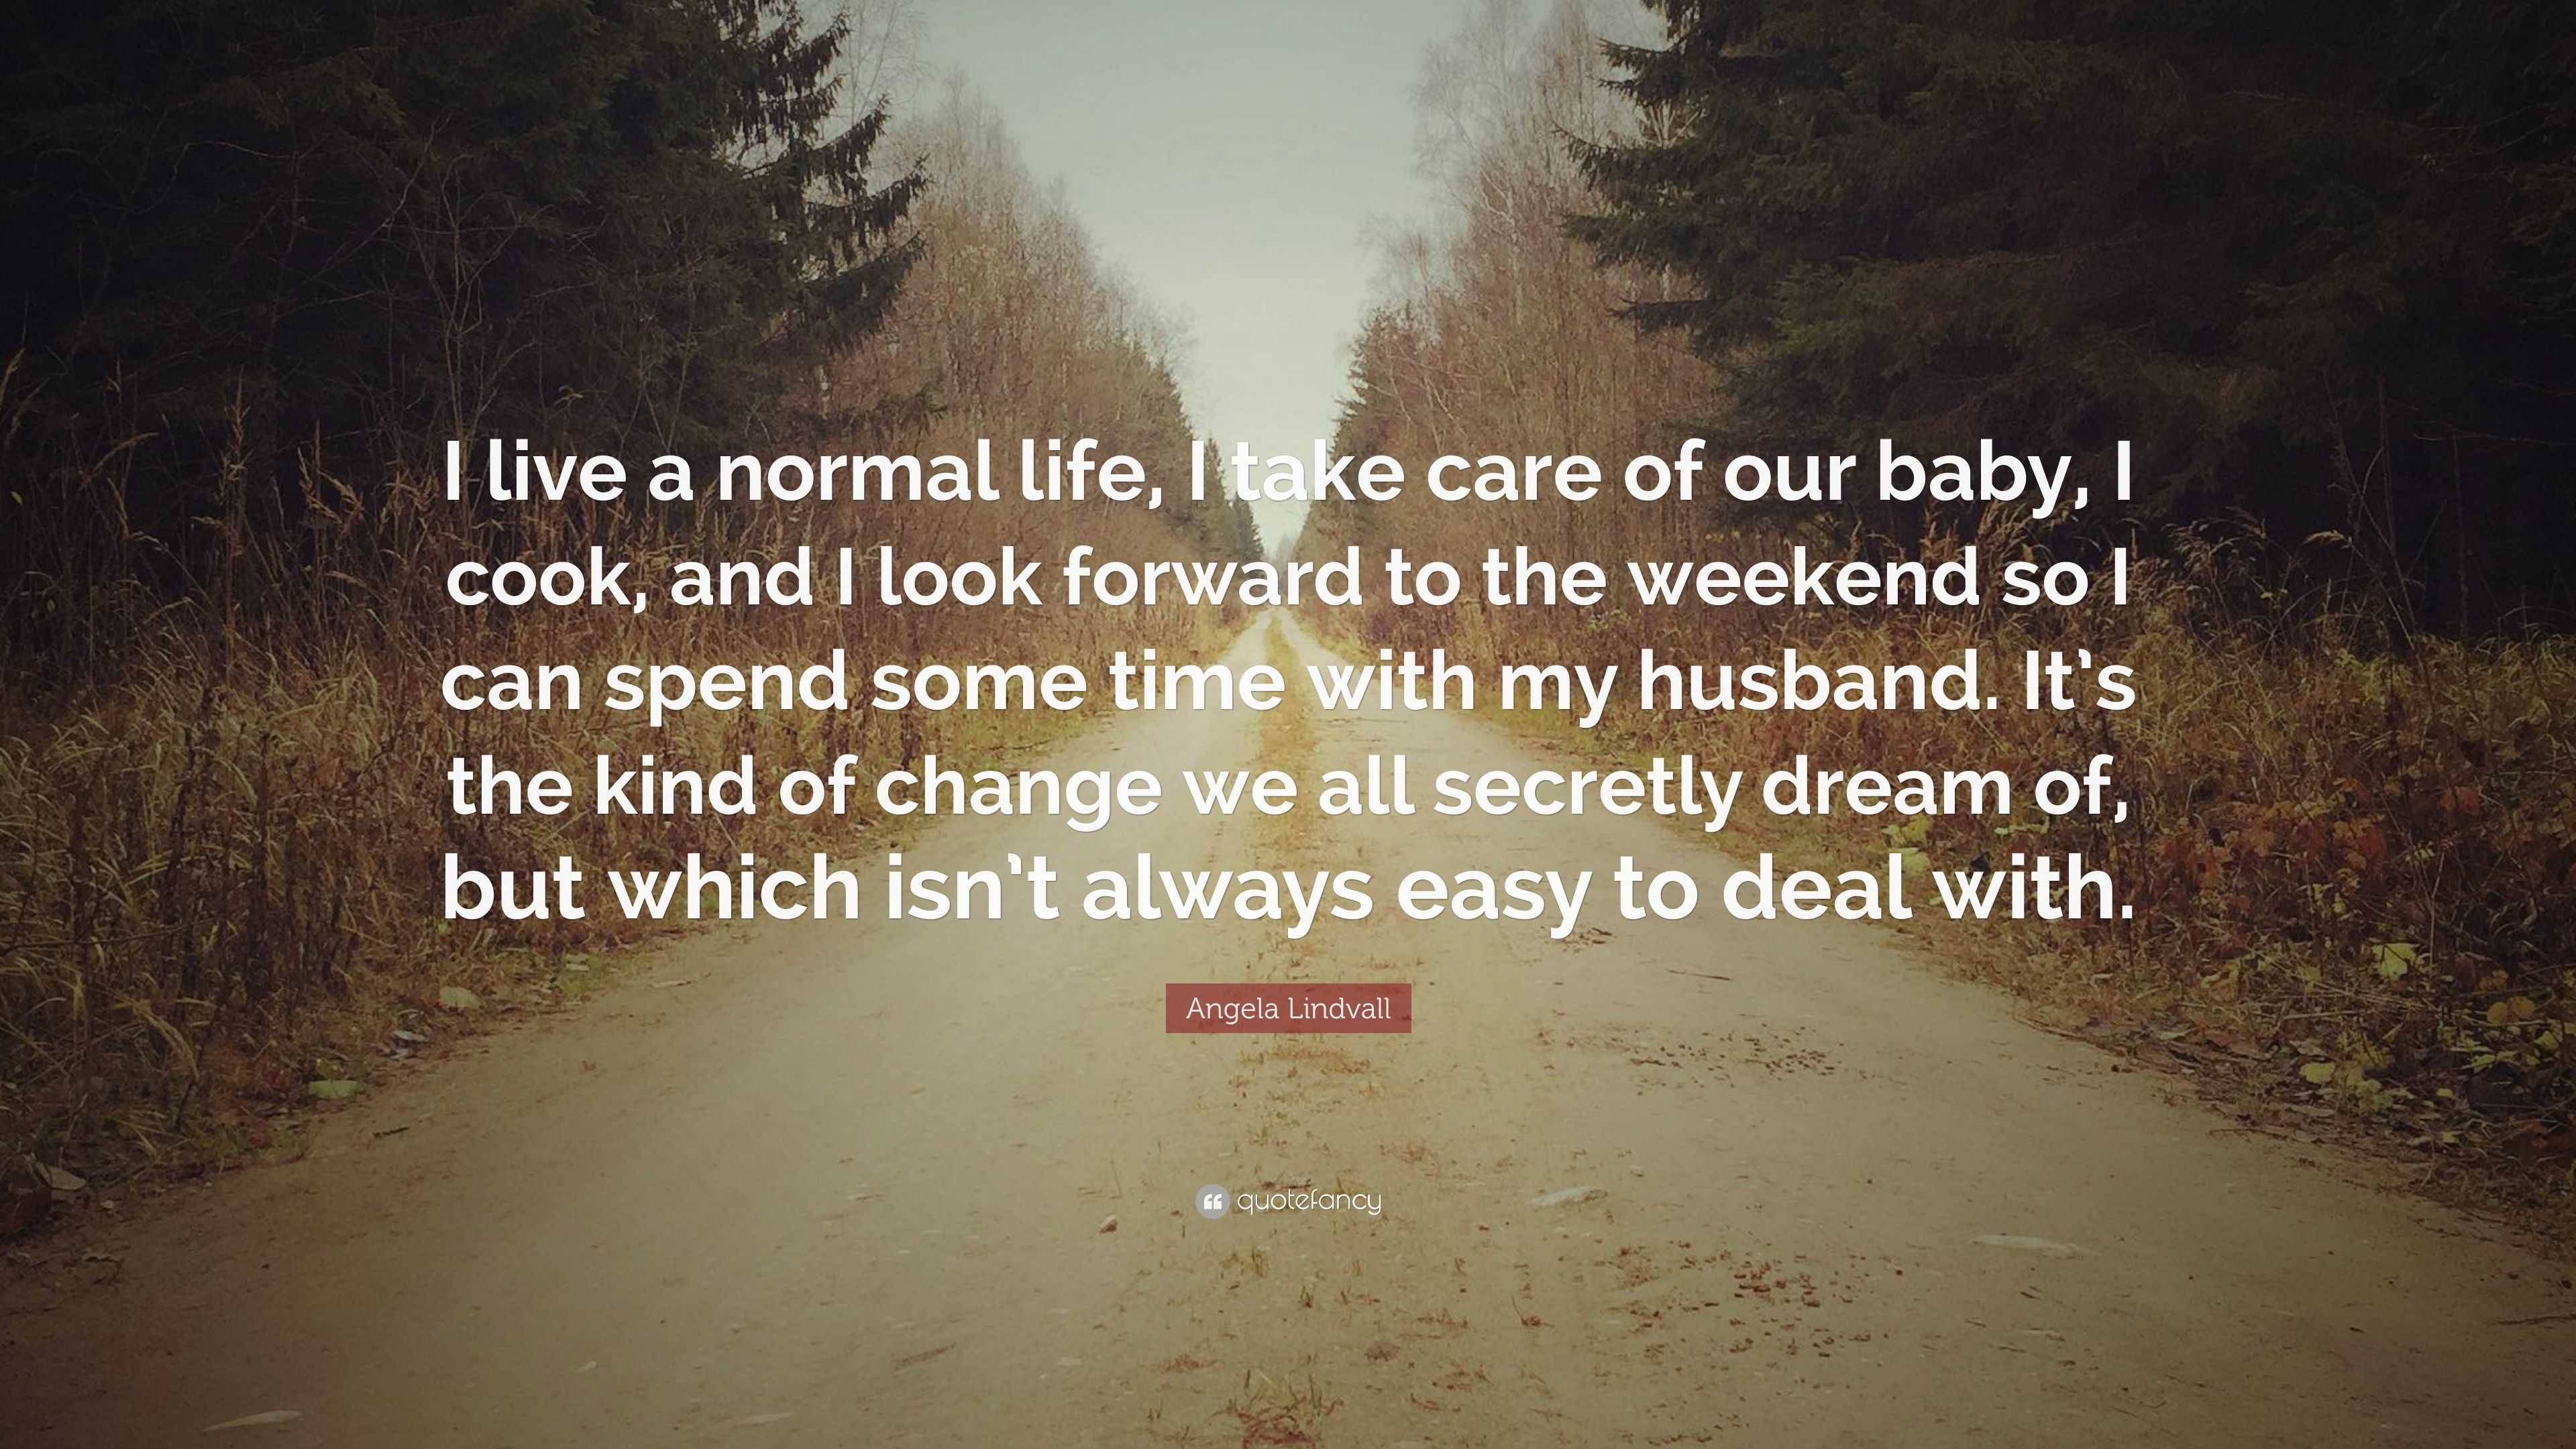 Angela Lindvall Quote “I live a normal life I take care of our